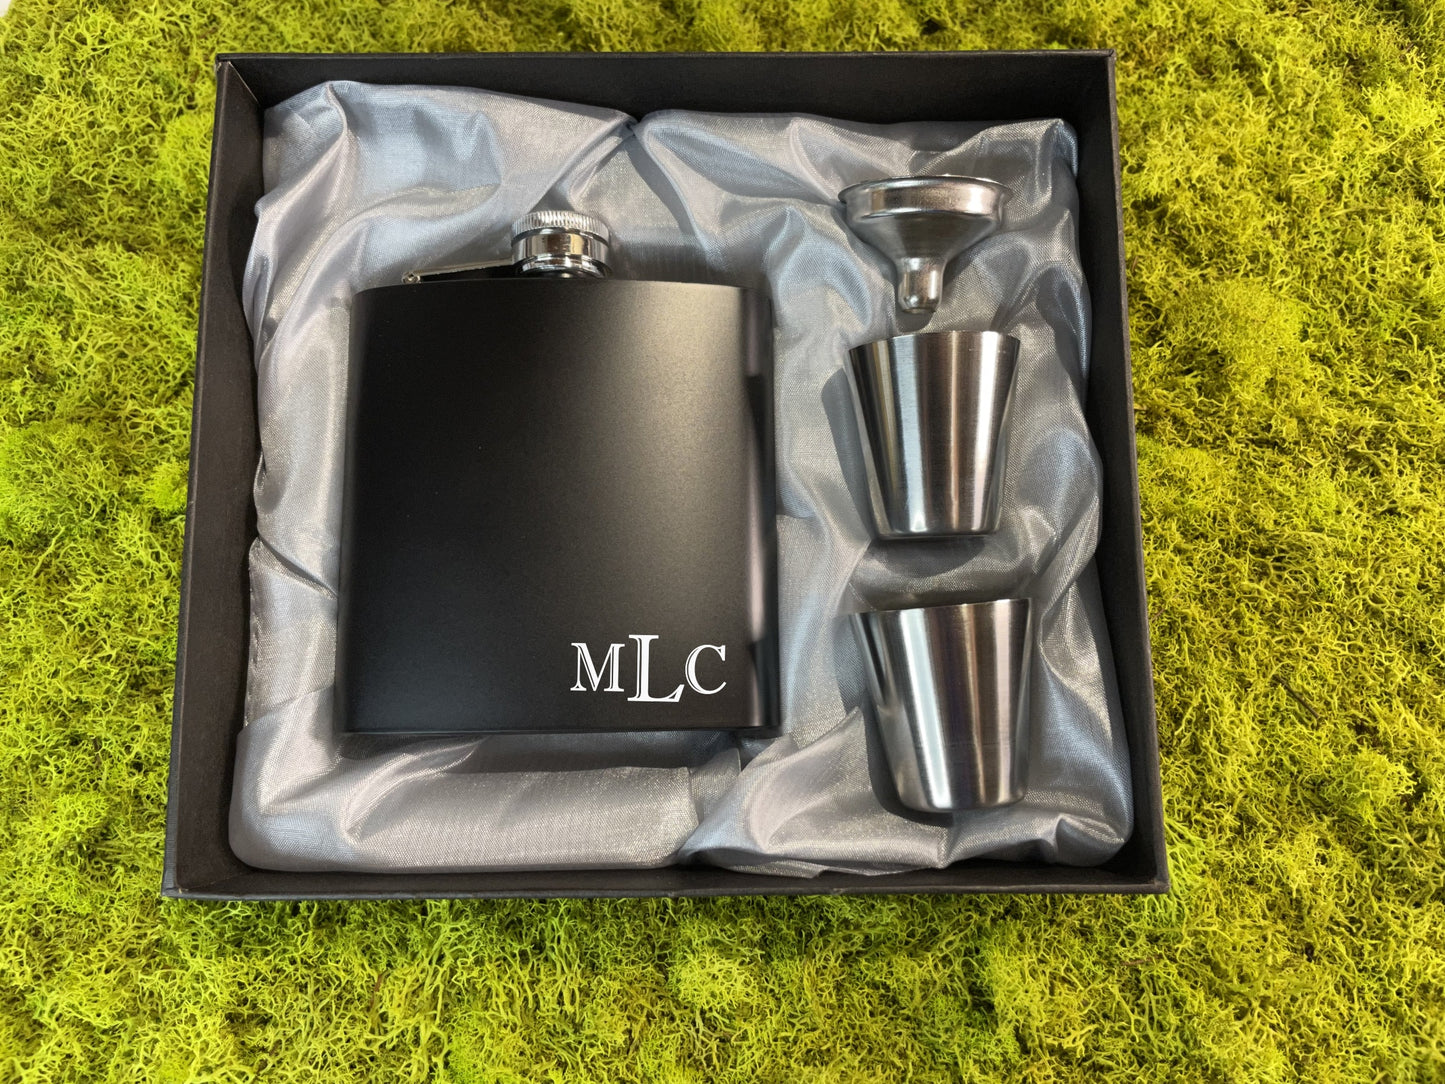 Personalized Anniversary Flask Set with Box